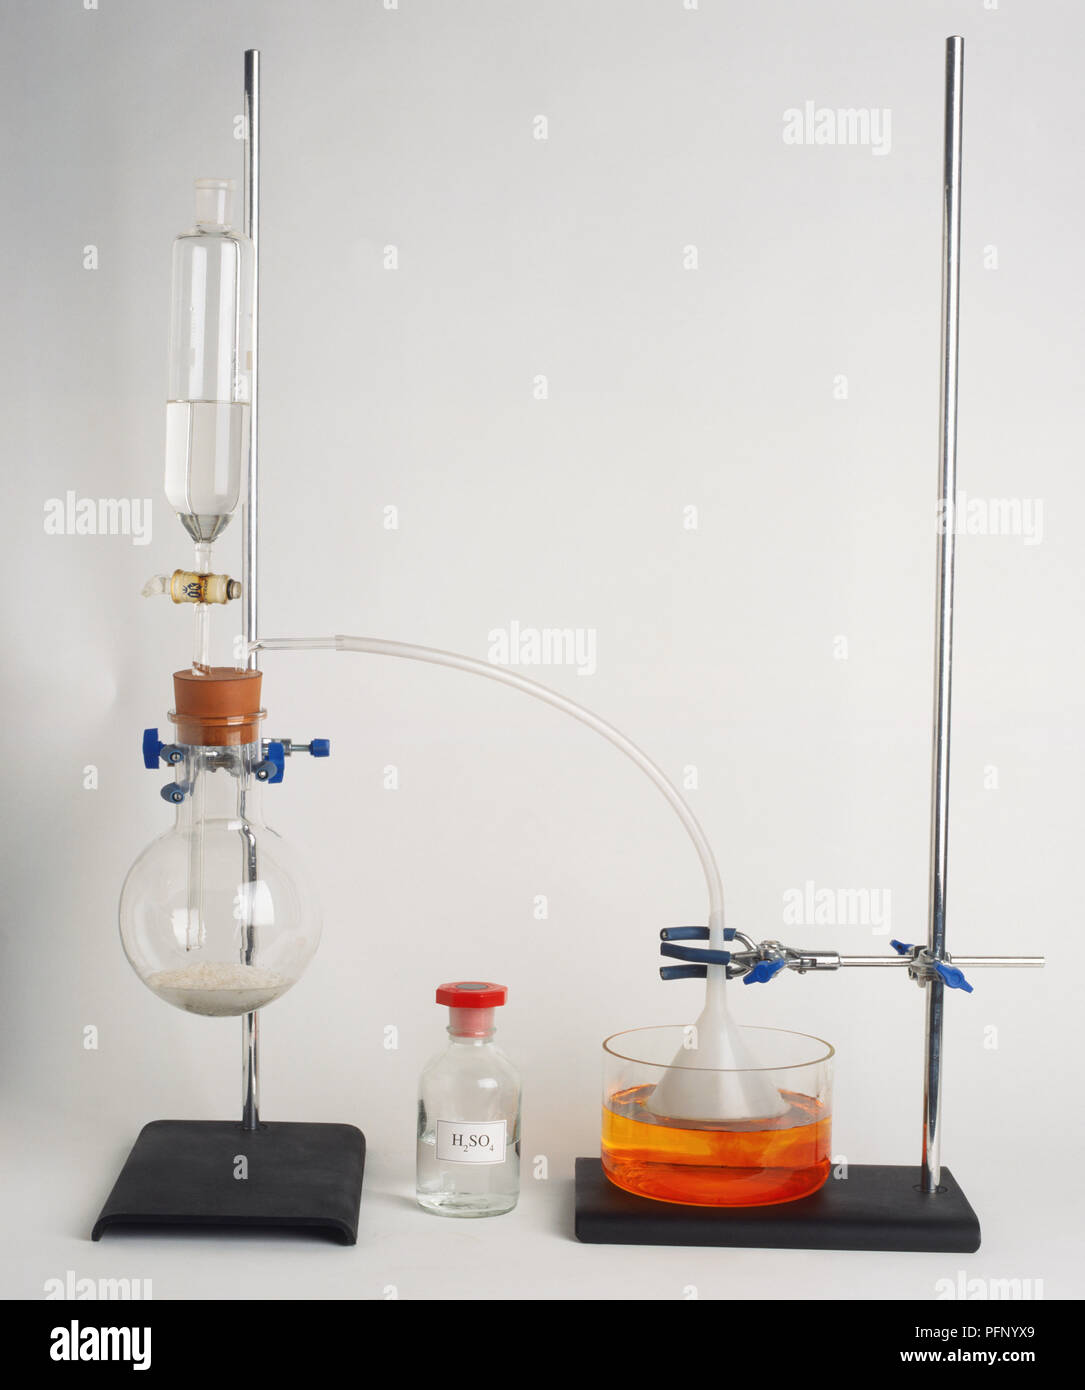 Clamp stands holding apparatus to prepare hydrochloric acid using sulphuric acid and sodium chloride. Stock Photo